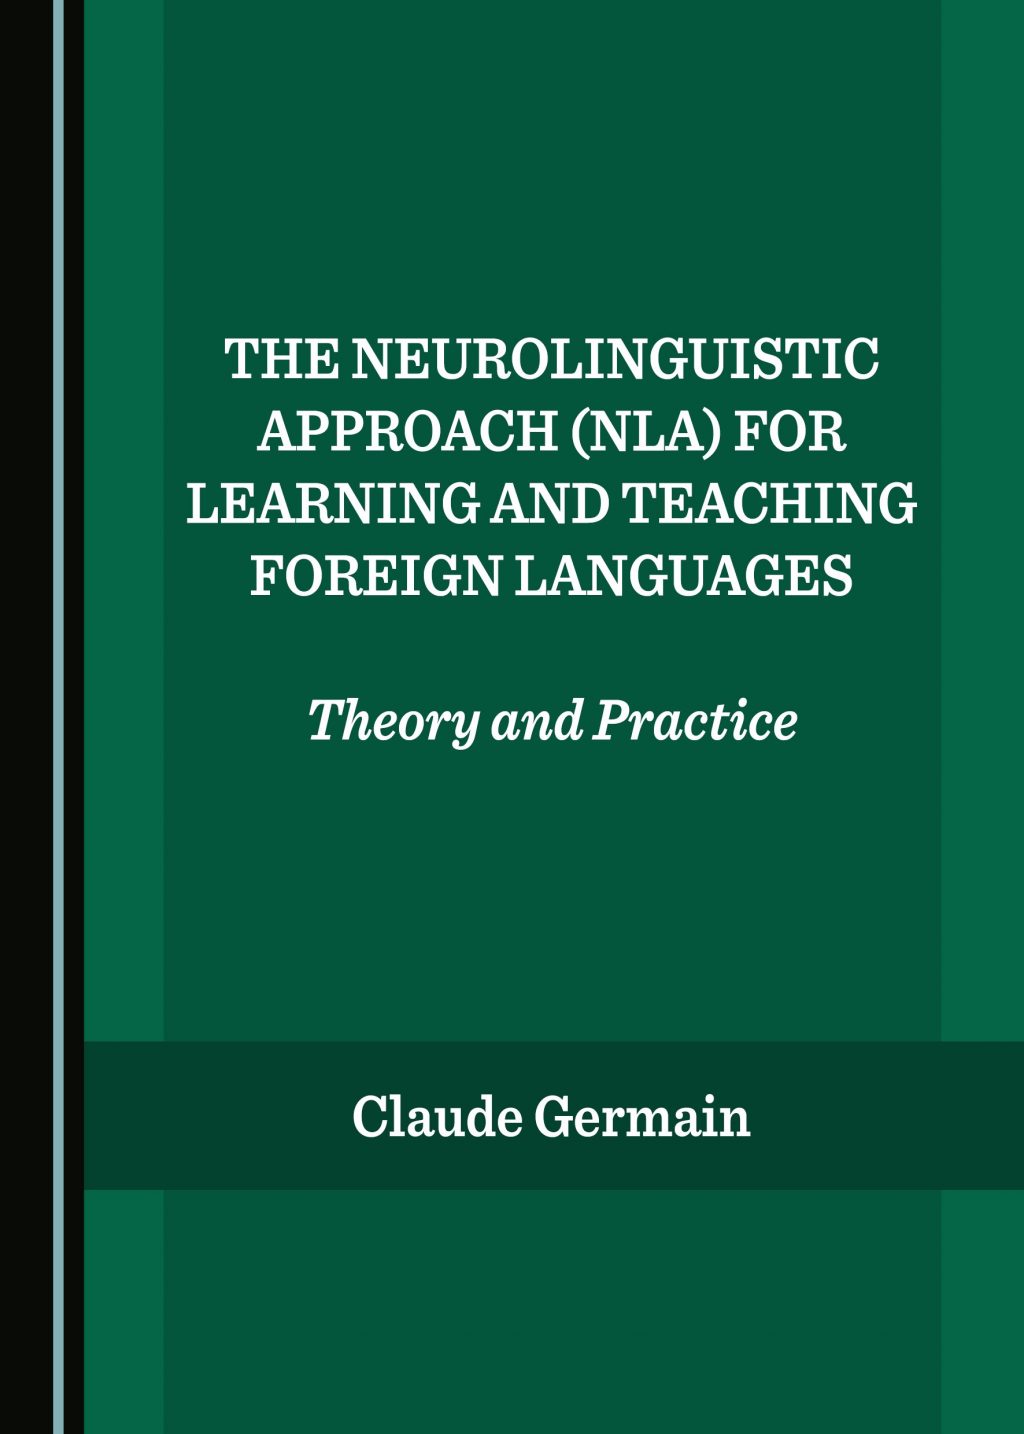 Theory　and　The　Approach　Neurolinguistic　Languages:　Teaching　and　(NLA)　for　Learning　Foreign　Practice　CIFRAN